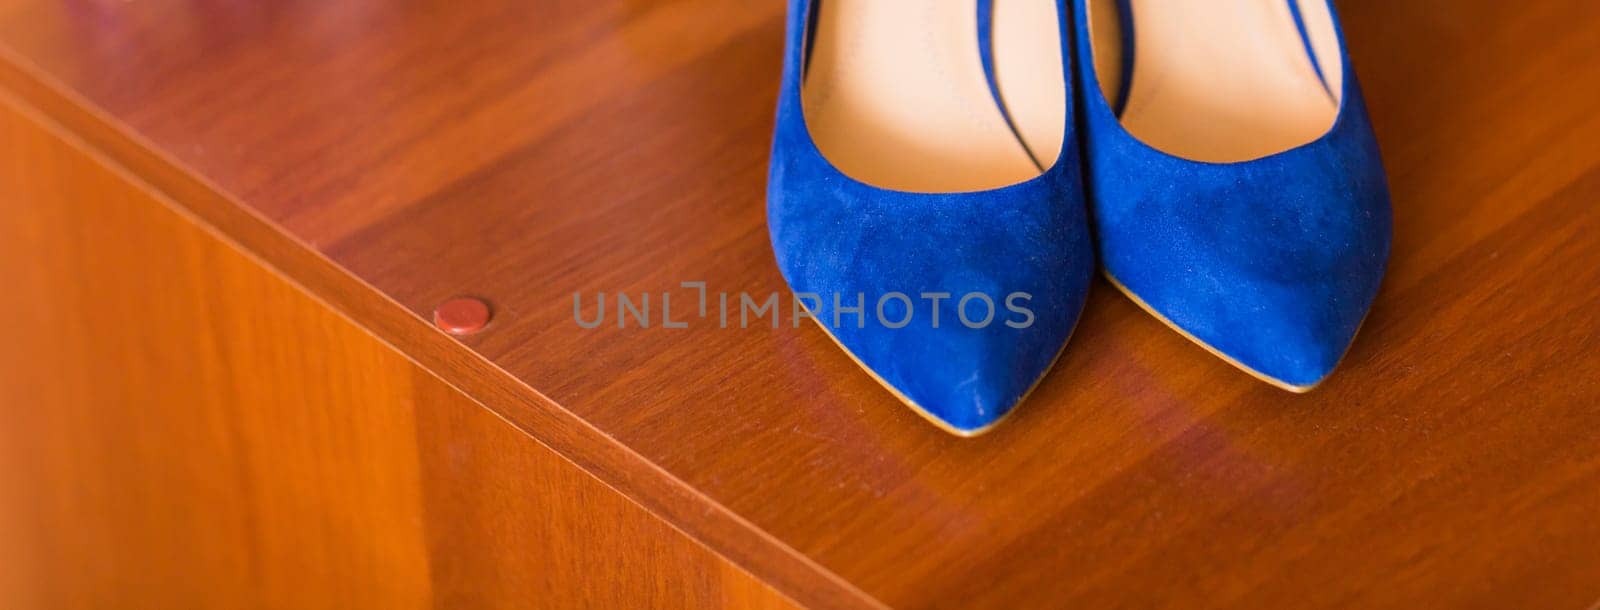 Blue suede women shoes banner copy space by Satura86